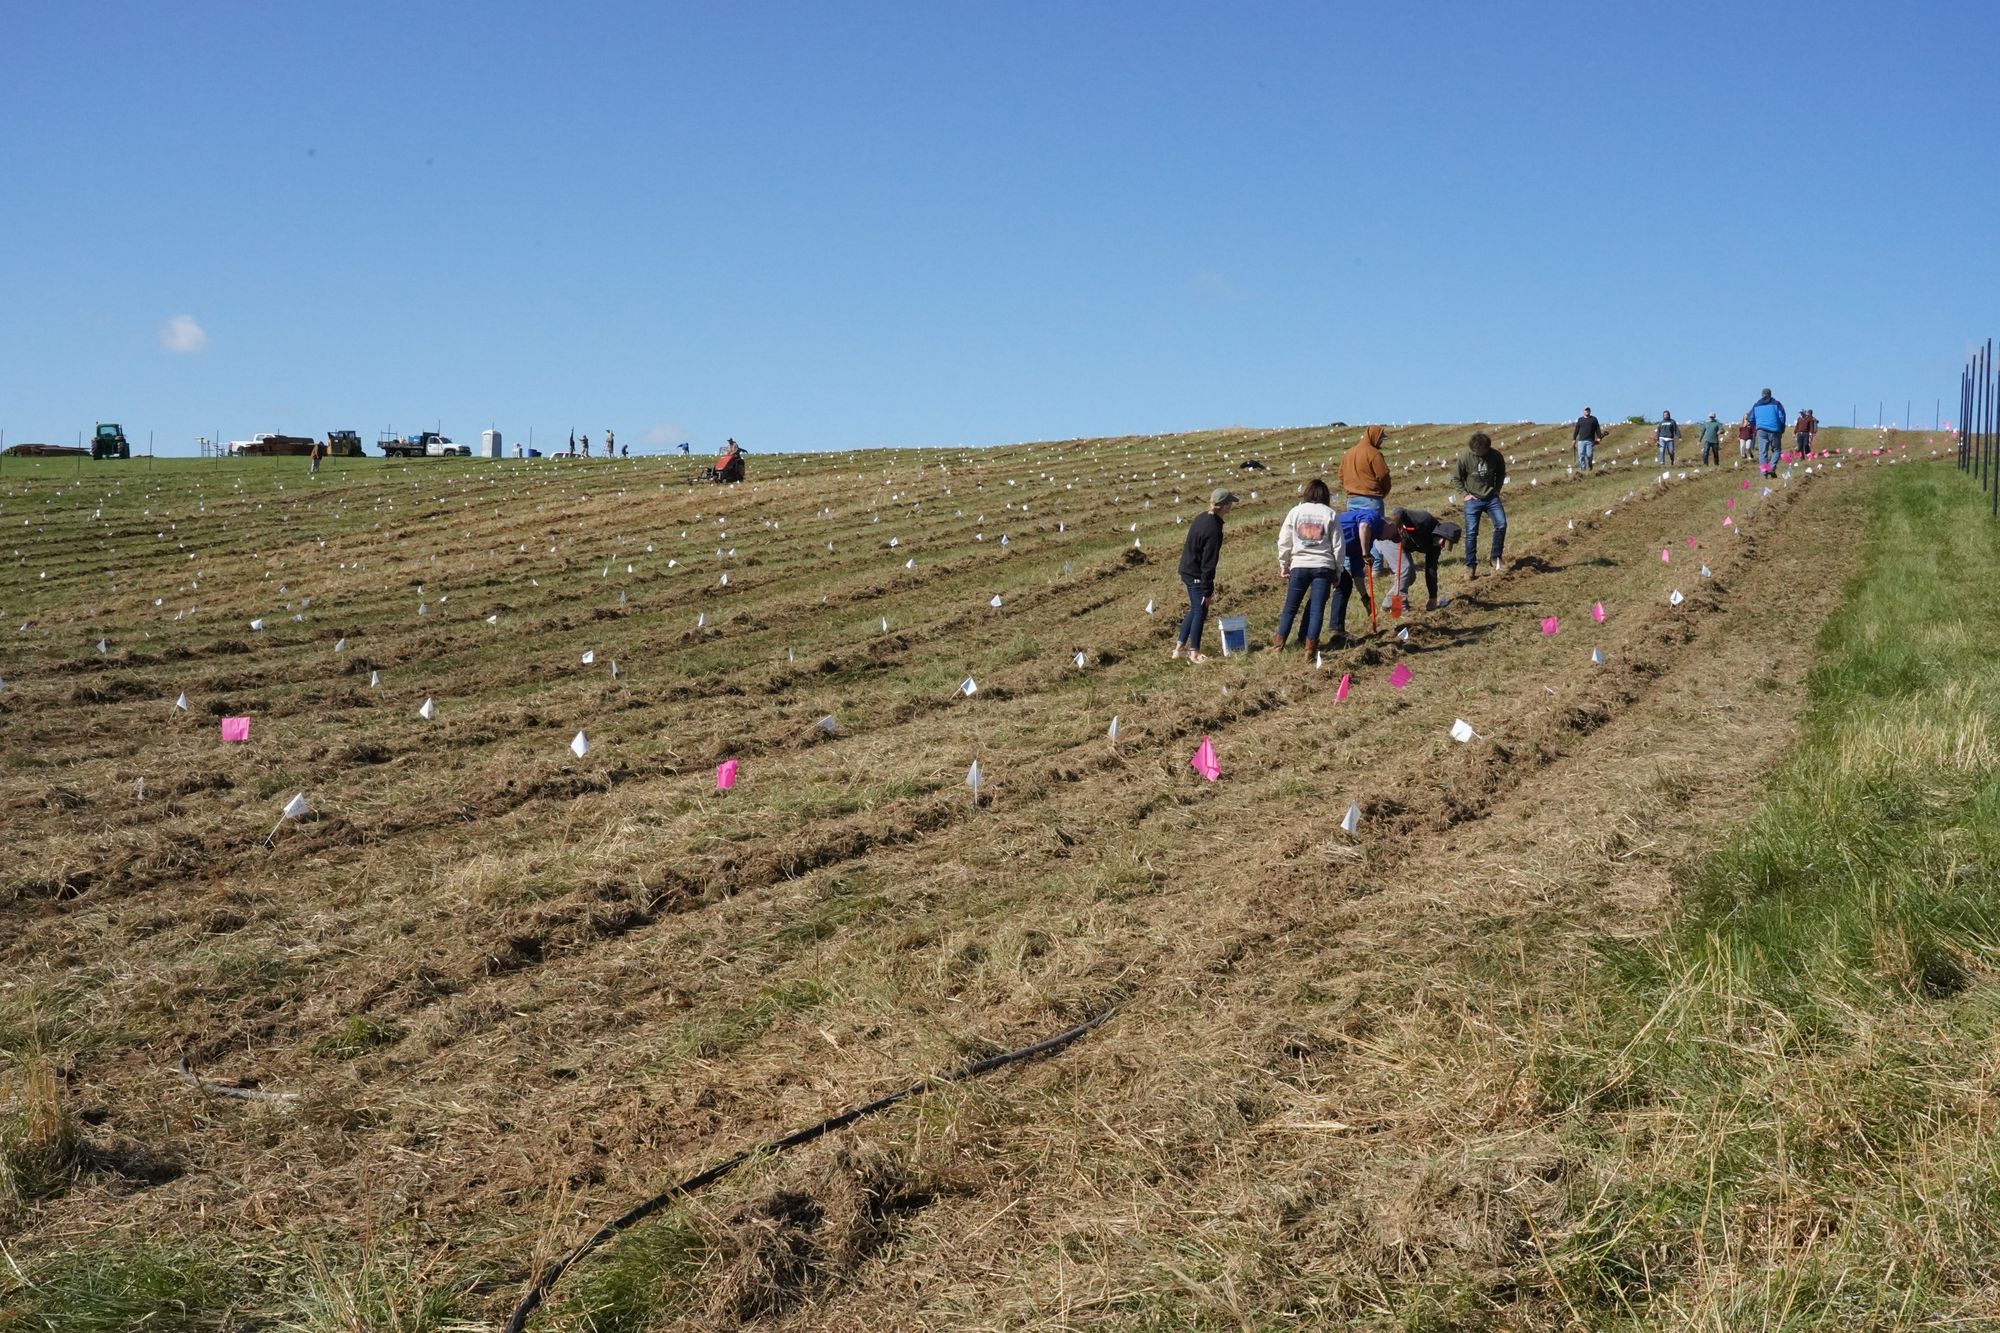 People putting small flag markers in rows in a field